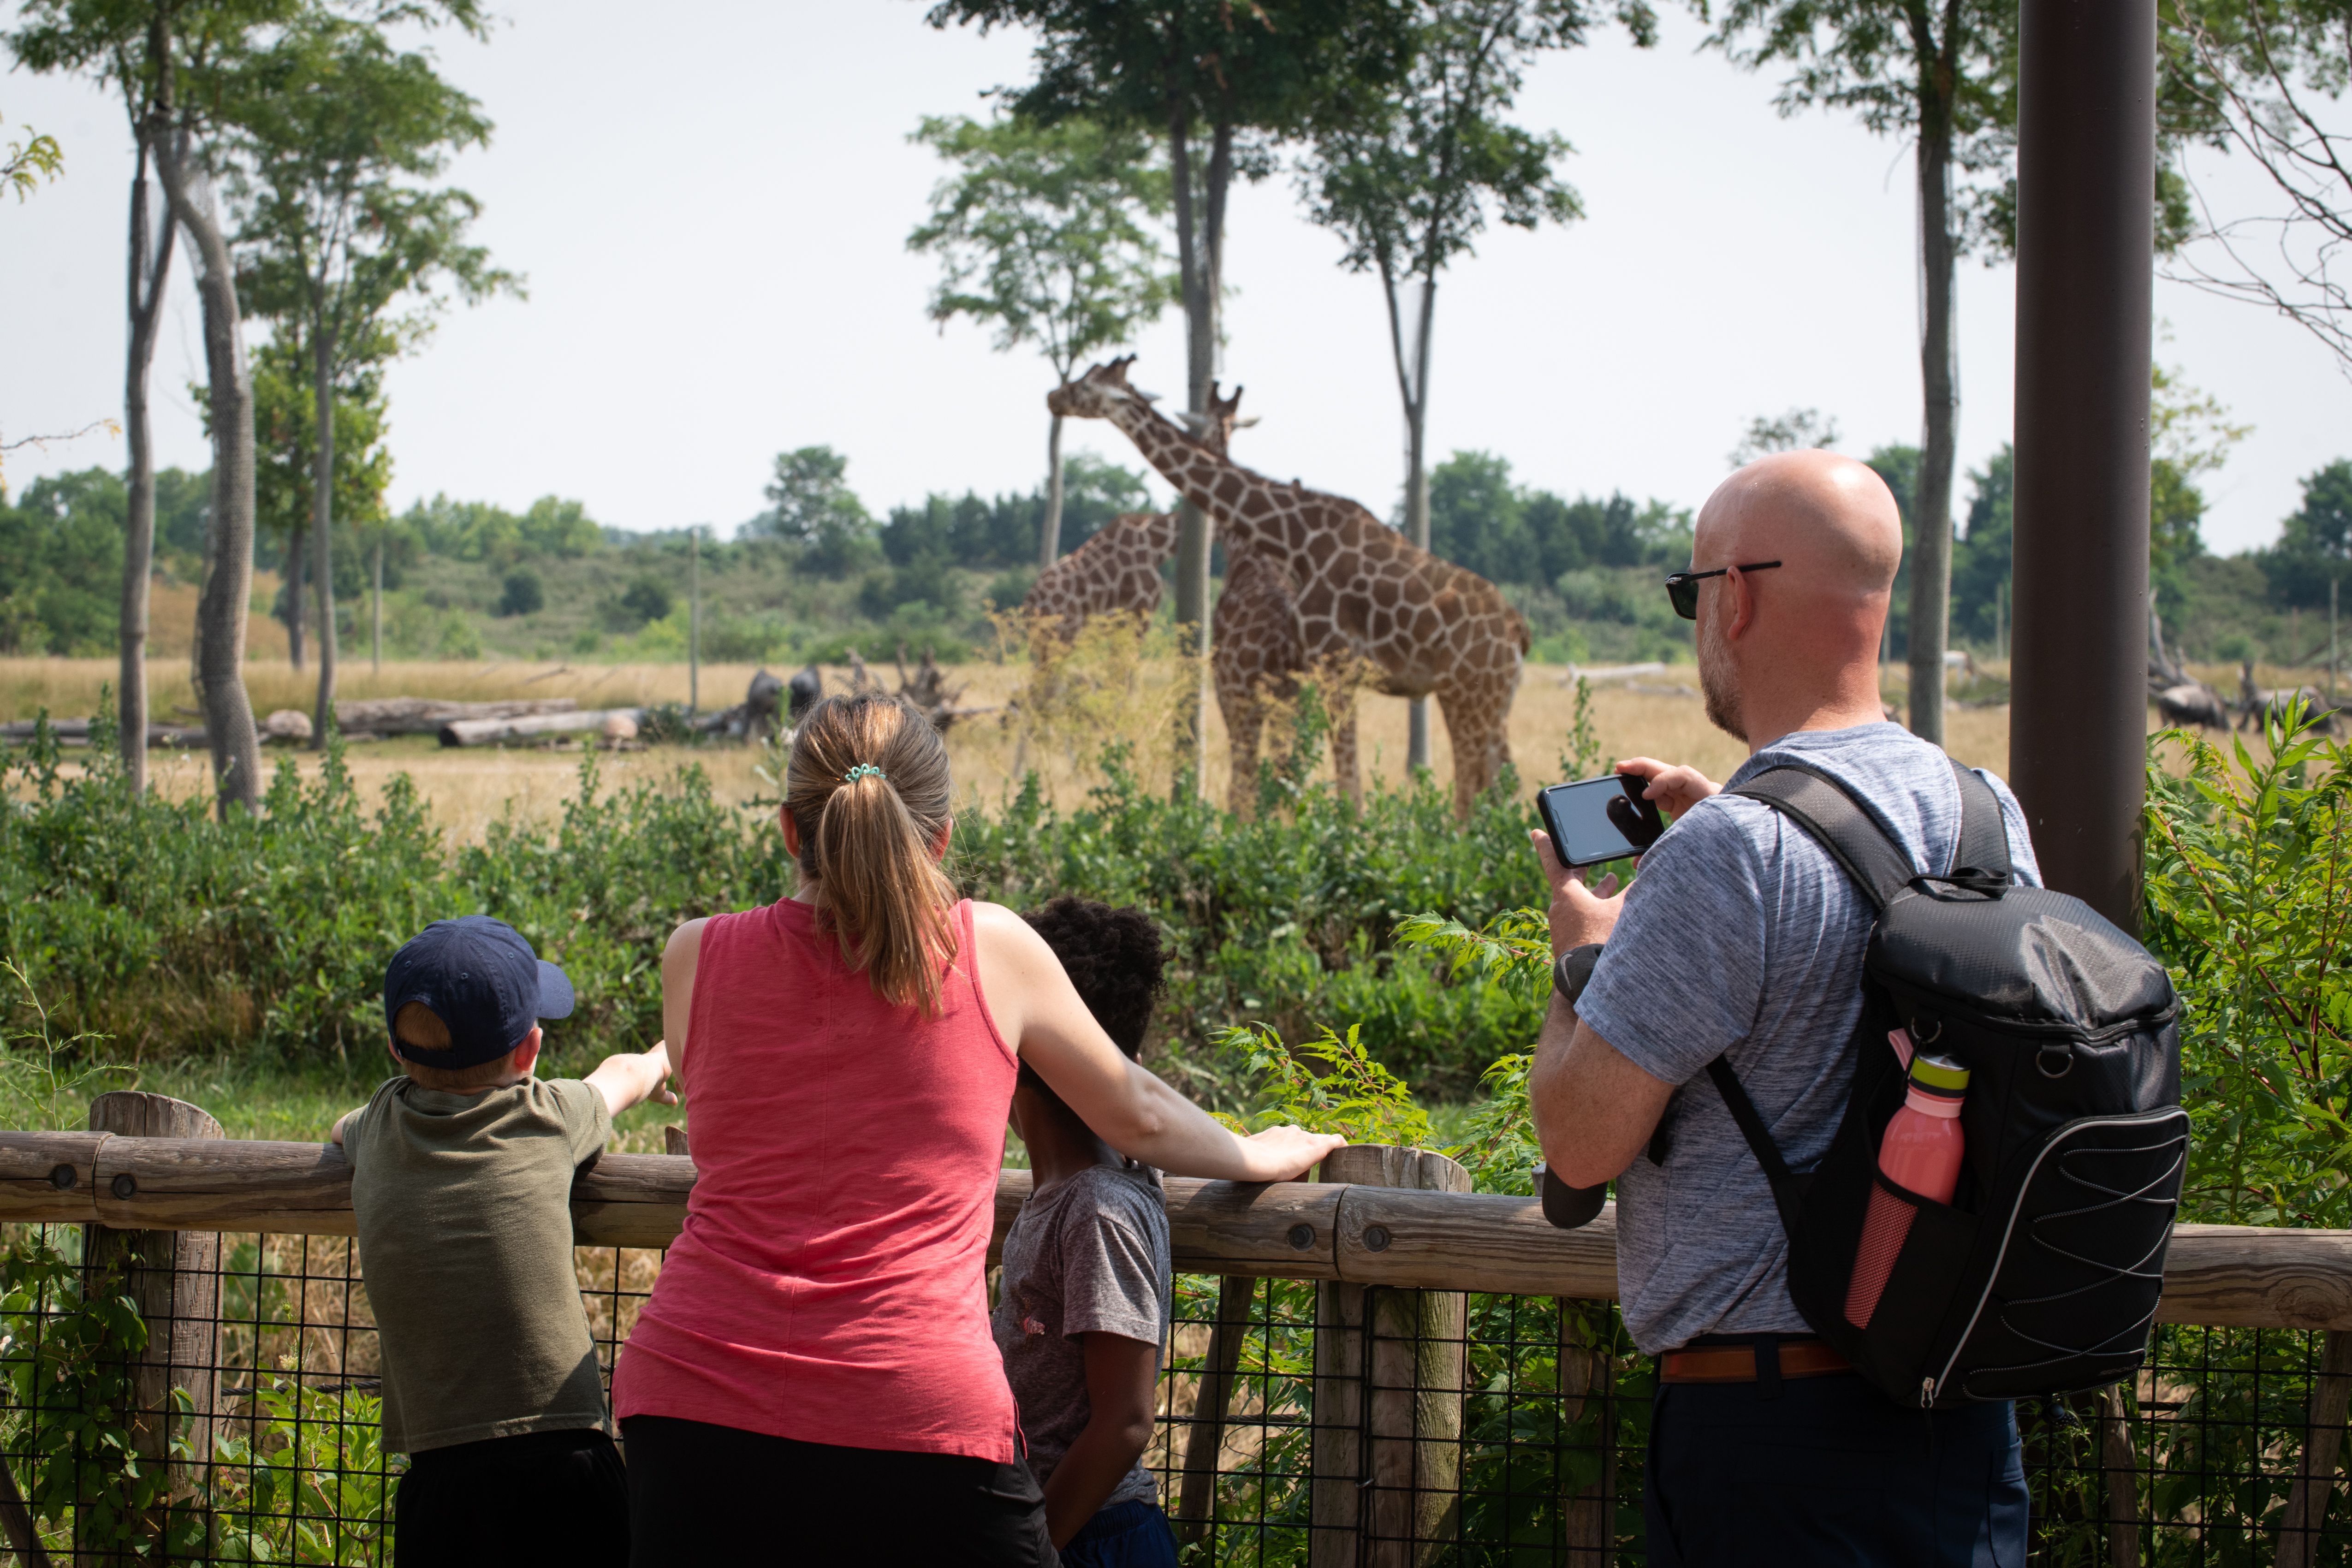 Guests look at giraffes in the Heart of Africa savanna